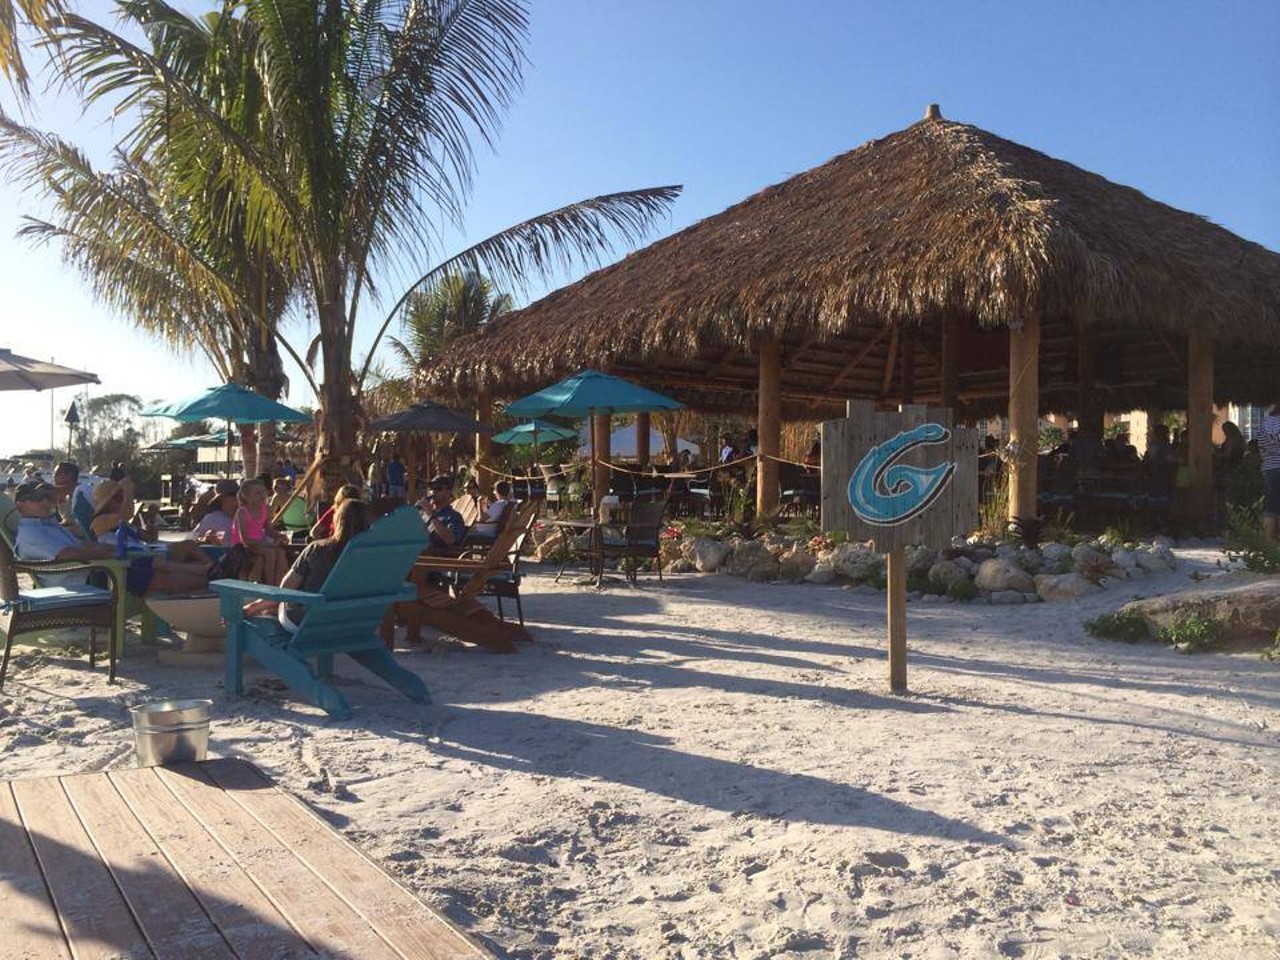  The Getaway  
13090 Gandy Blvd N, St. Petersburg, FL 33702, (727) 317-5751
With two locations, one in downtown St. Pete and one on Gandy Beach, The Getaway is a tropical, tiki paradise for both parents and their little ones. They have a serious drink menu that spans two full pages. 
Photo via  The Getaway/Facebook